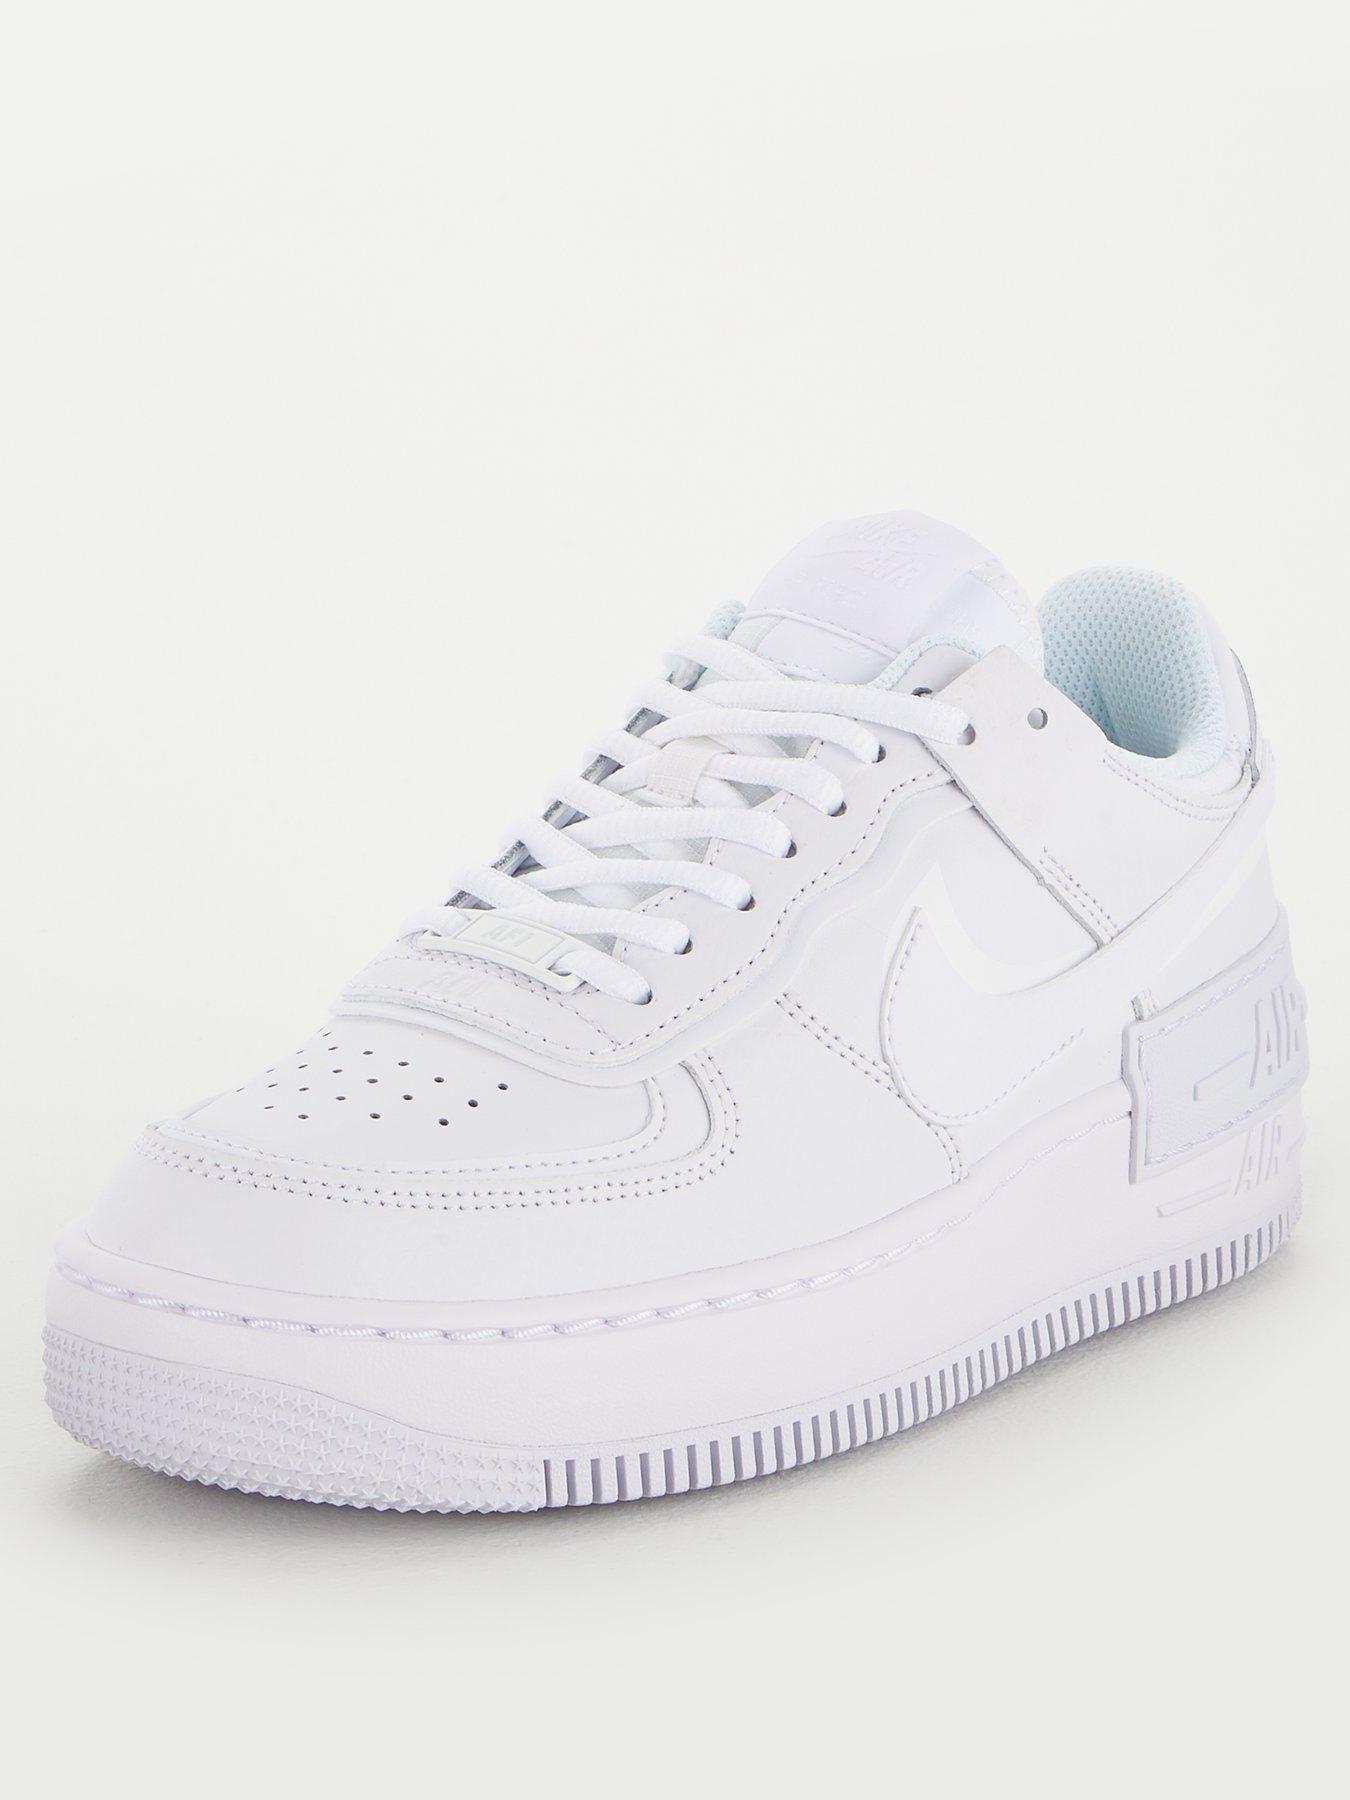 Trainers AF1 Shadow - White